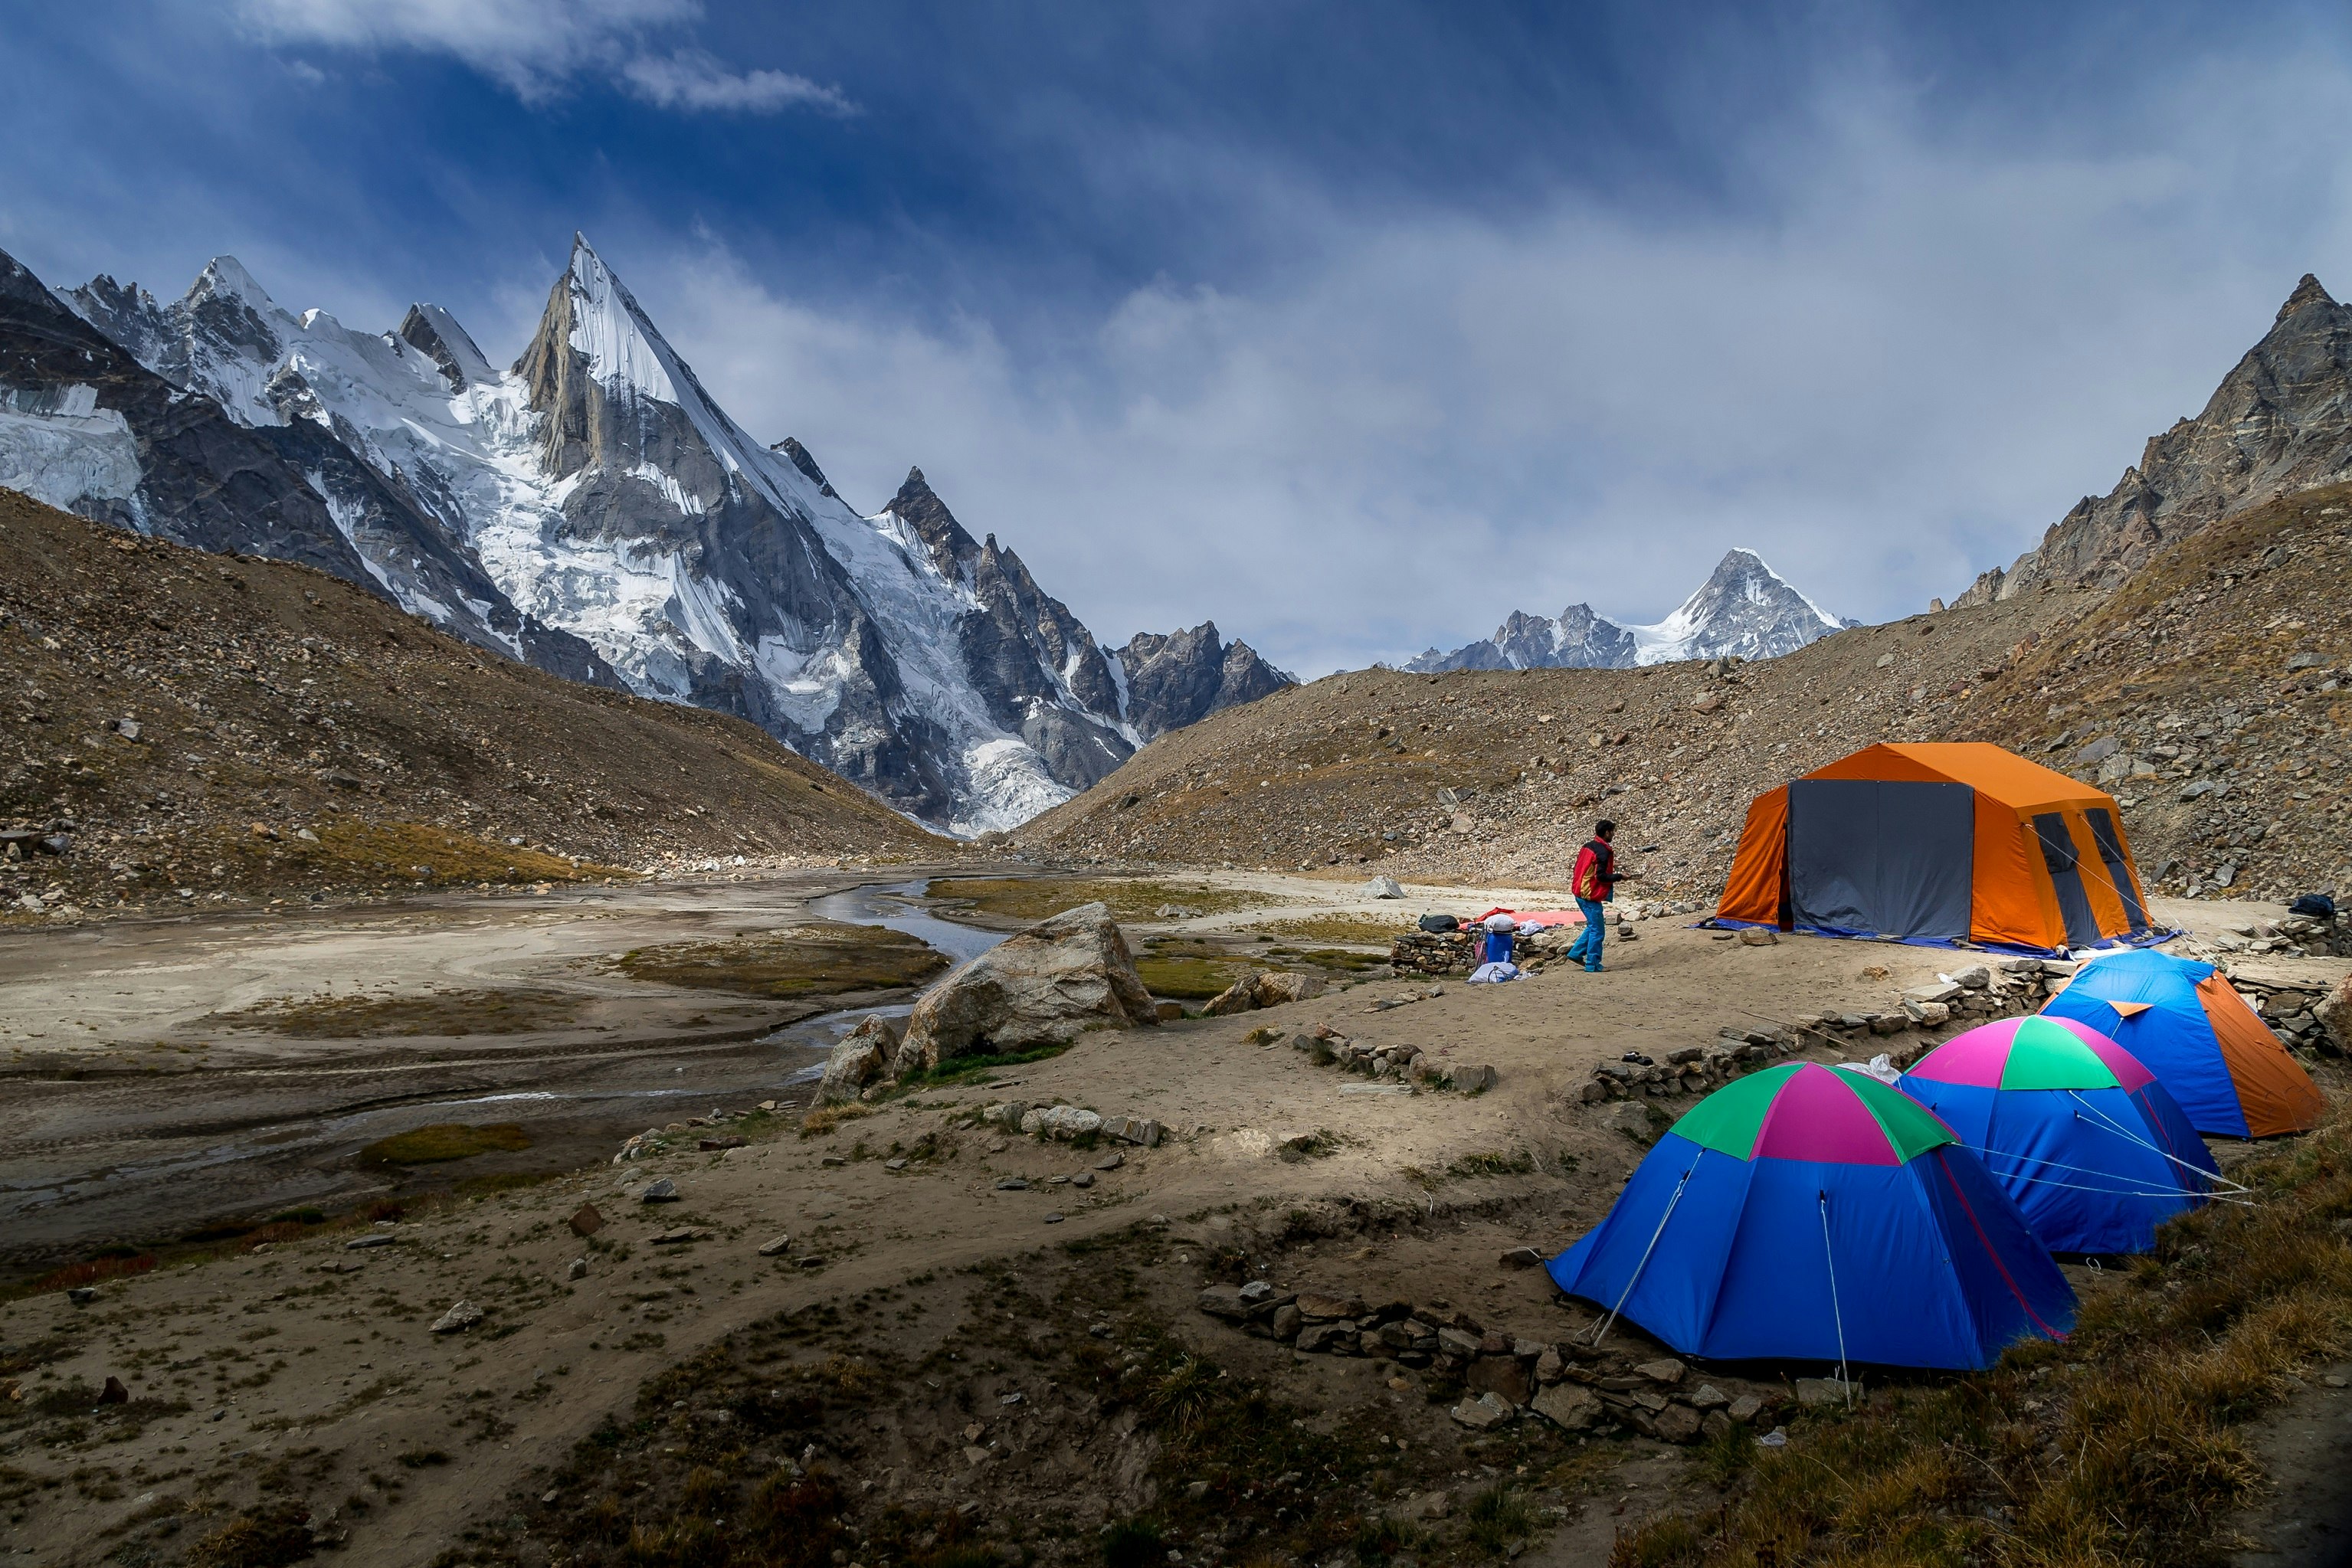 A series of colourful tents stand in a line at the campsite in Lalia Peak, part of the K2 base camp trek. A narrow river runs past the camp site, while a number of jagged peaks are visible in the background.